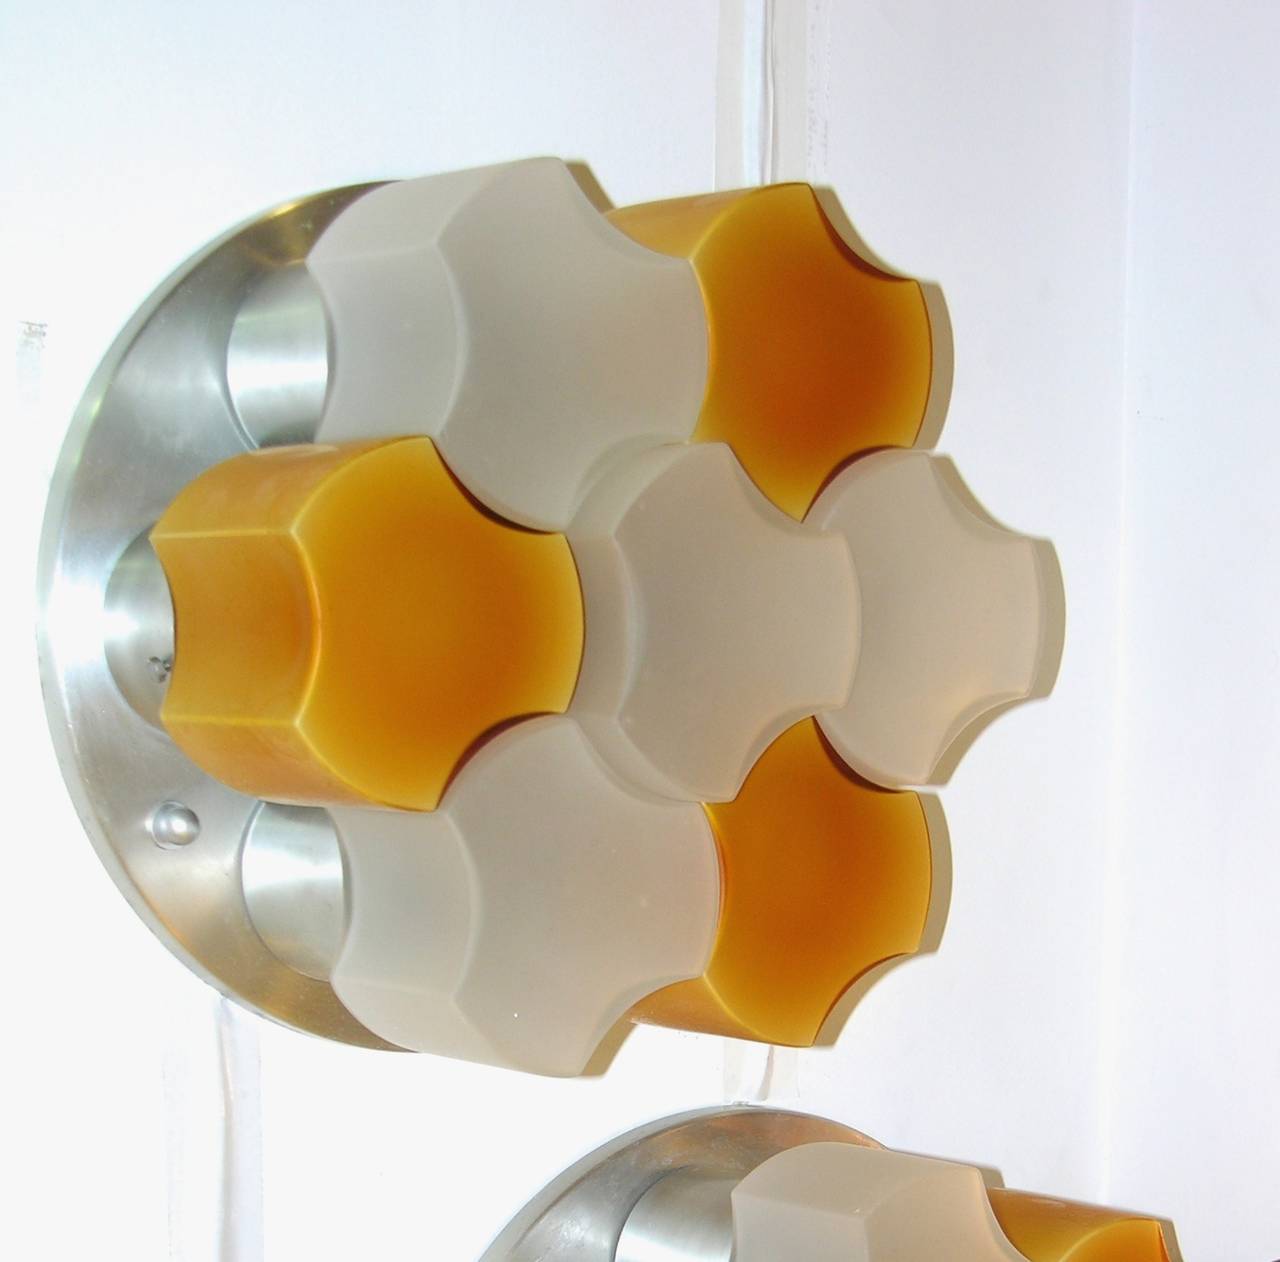 A very rare Italian pair of lights by Martinelli Luce, 1963, characterized by an essential Art Design and inventiveness, two prominent elements of Martinelli Luce philosophy. These highly decorative yet very functional lights (that can be used on